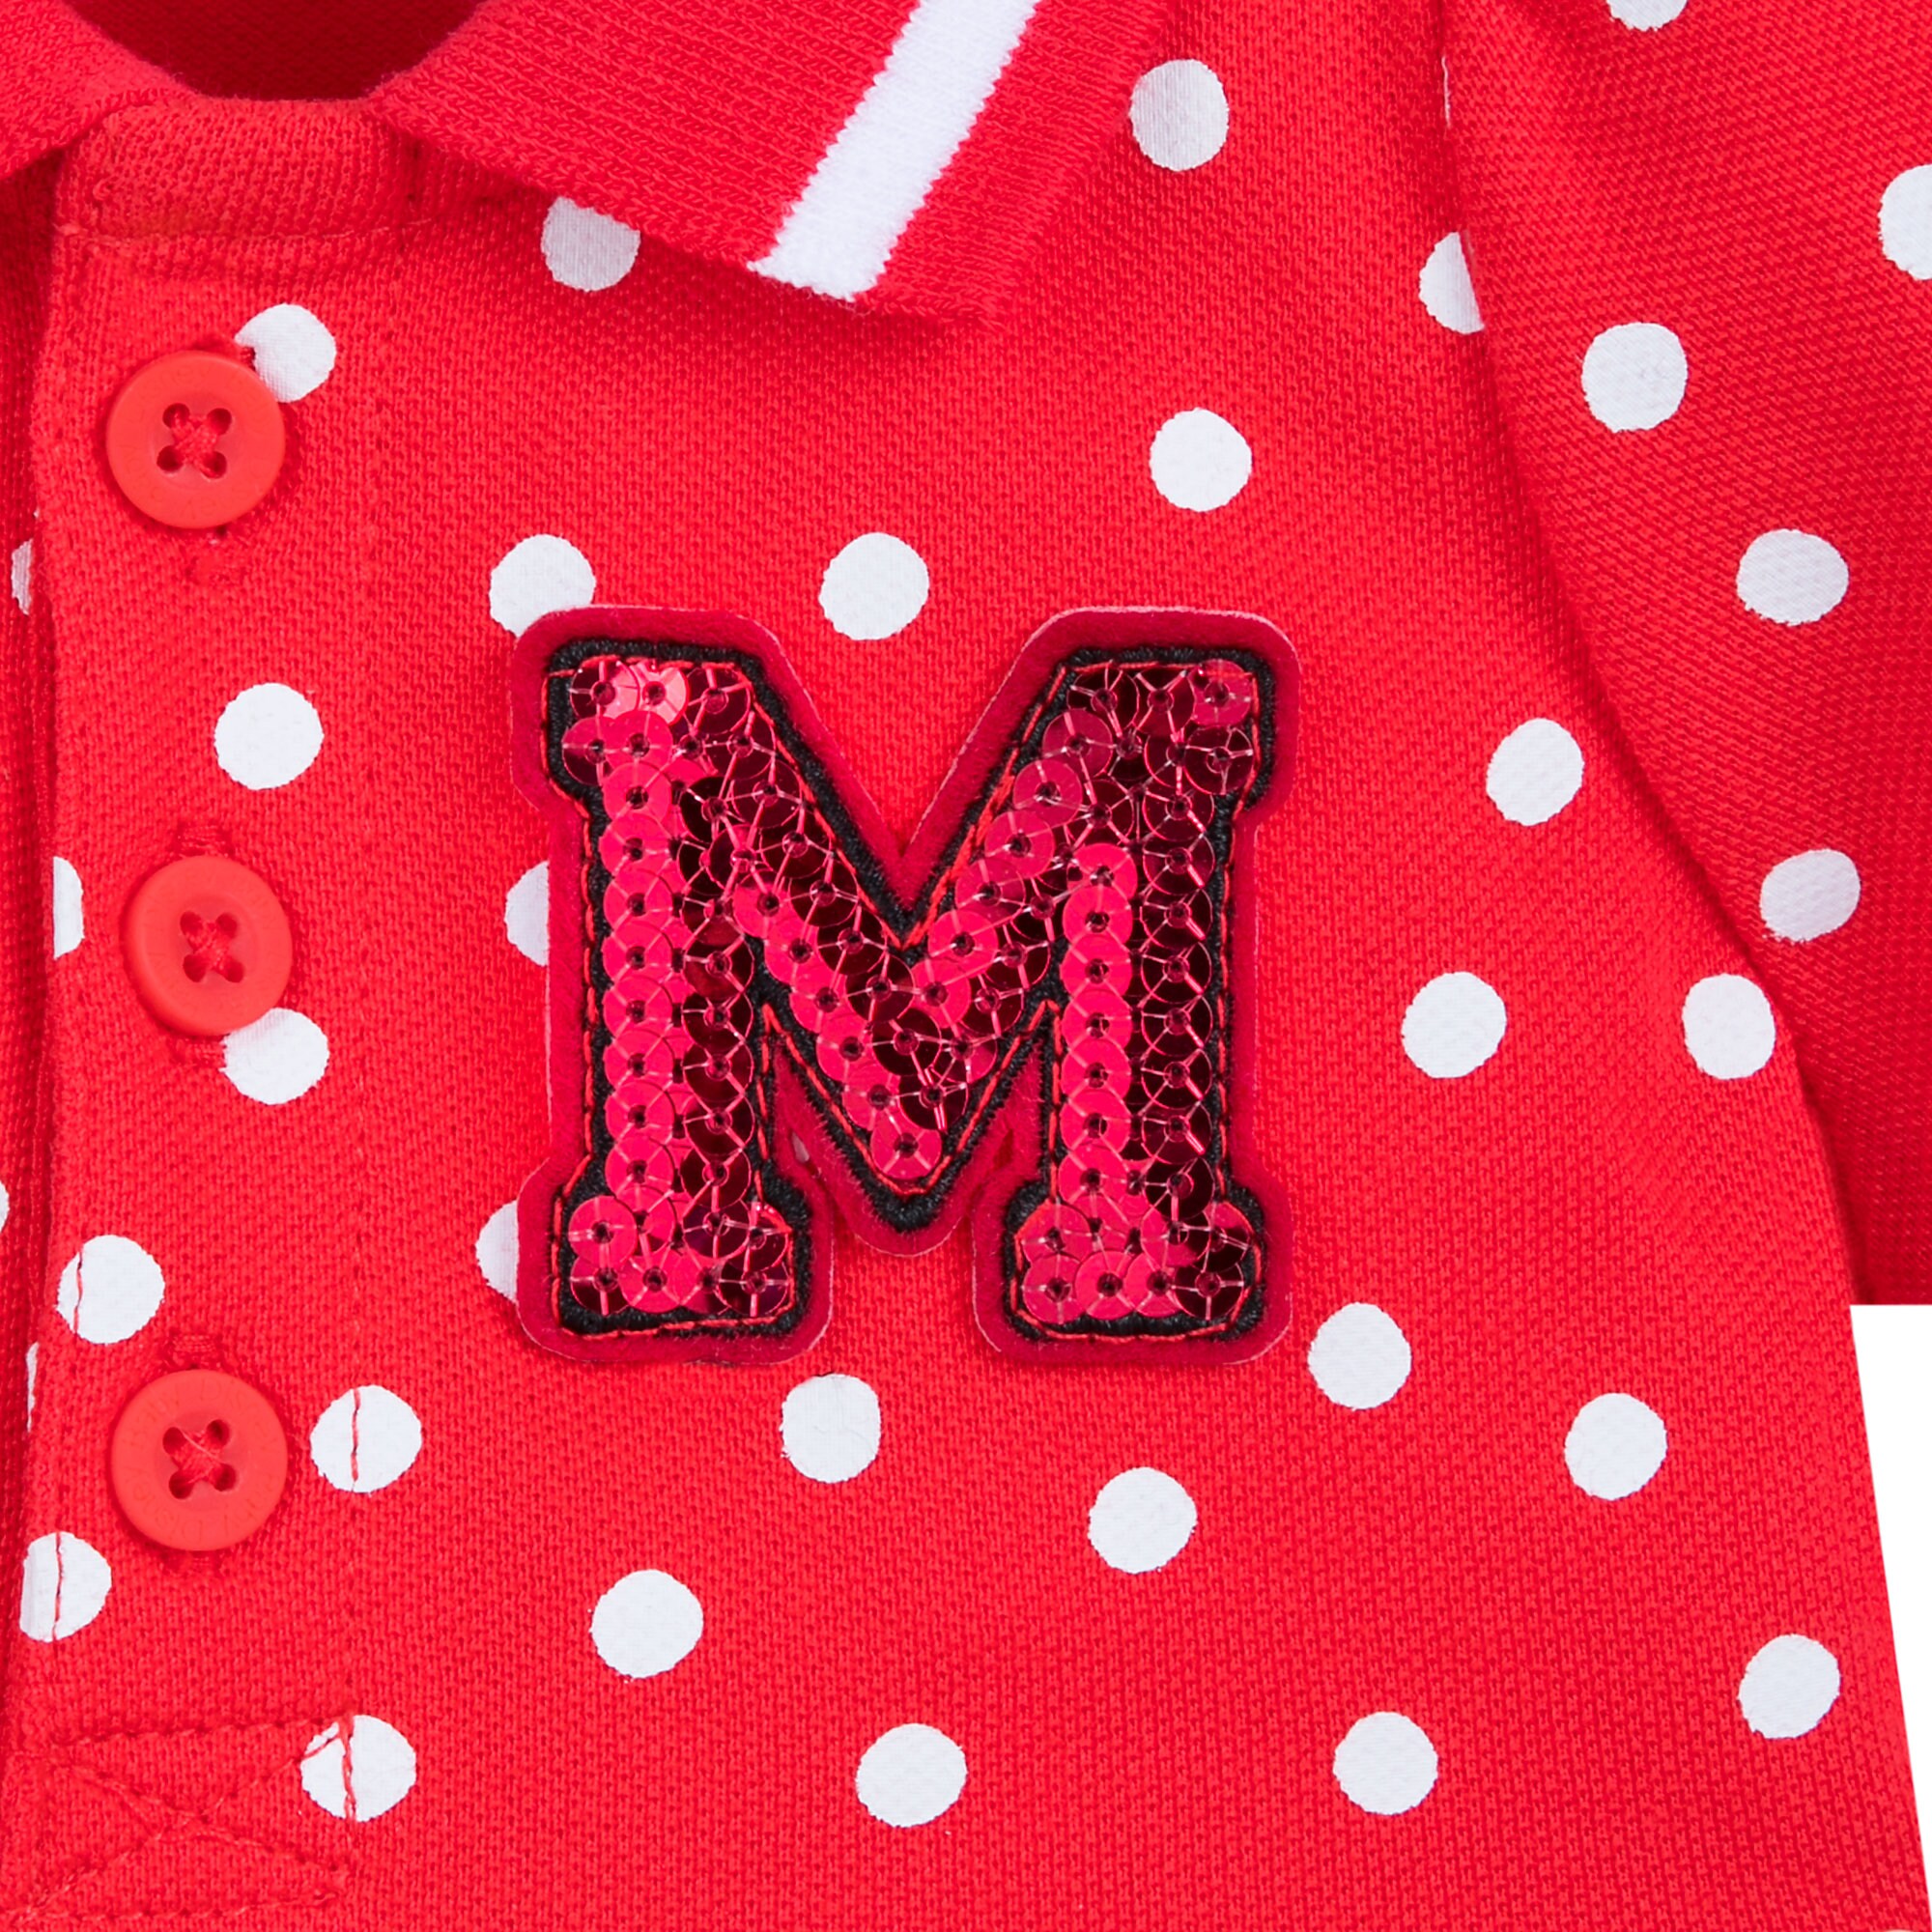 Minnie Mouse Red Polka Dot Dress for Baby